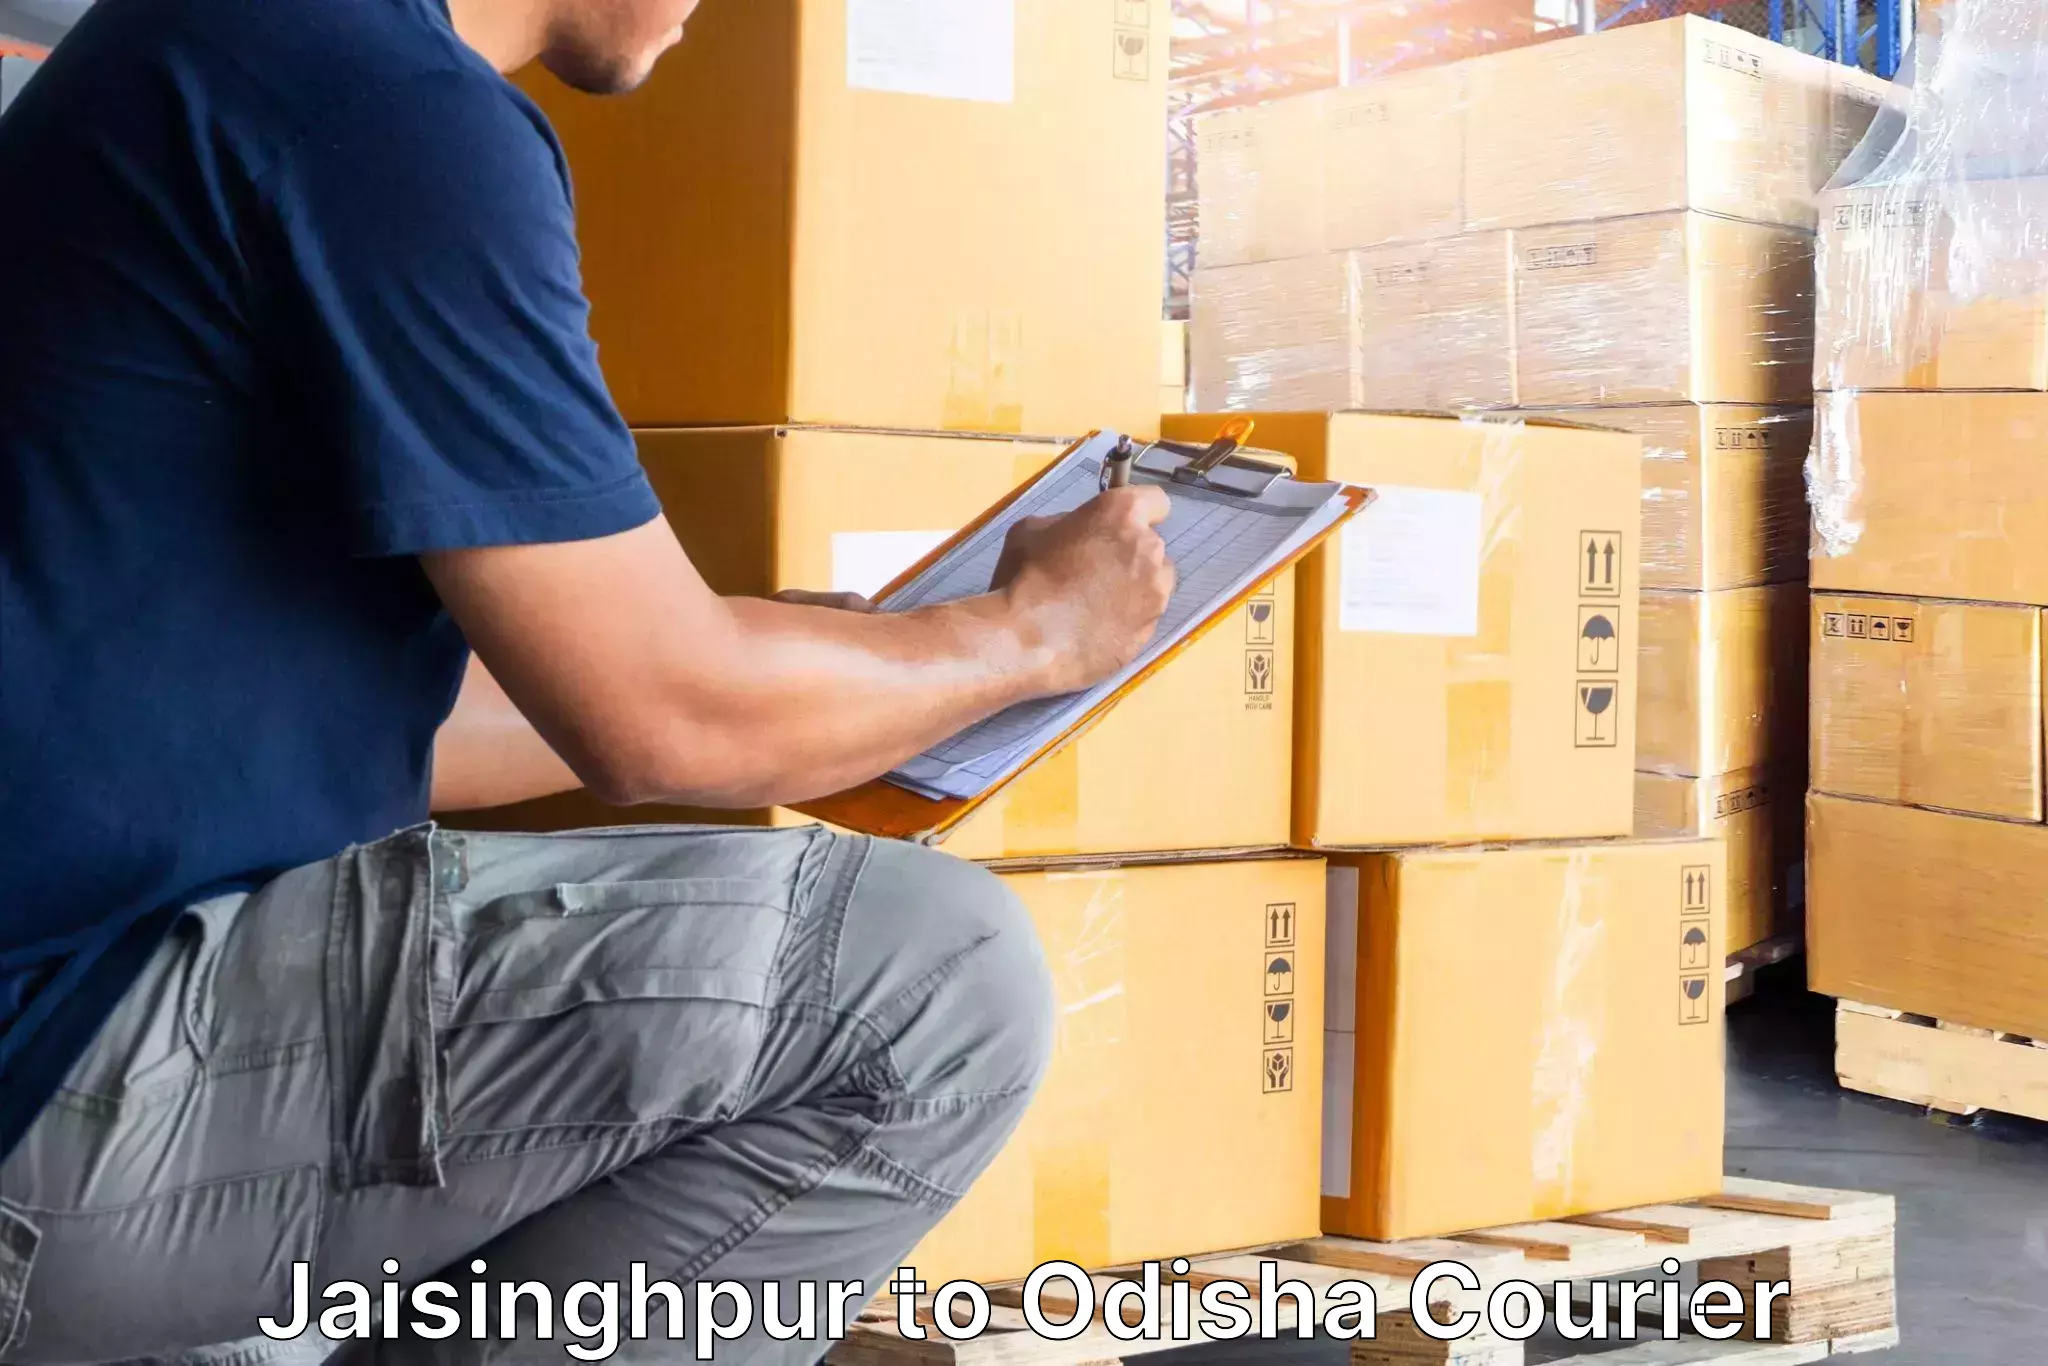 Quality moving and storage in Jaisinghpur to Balimela